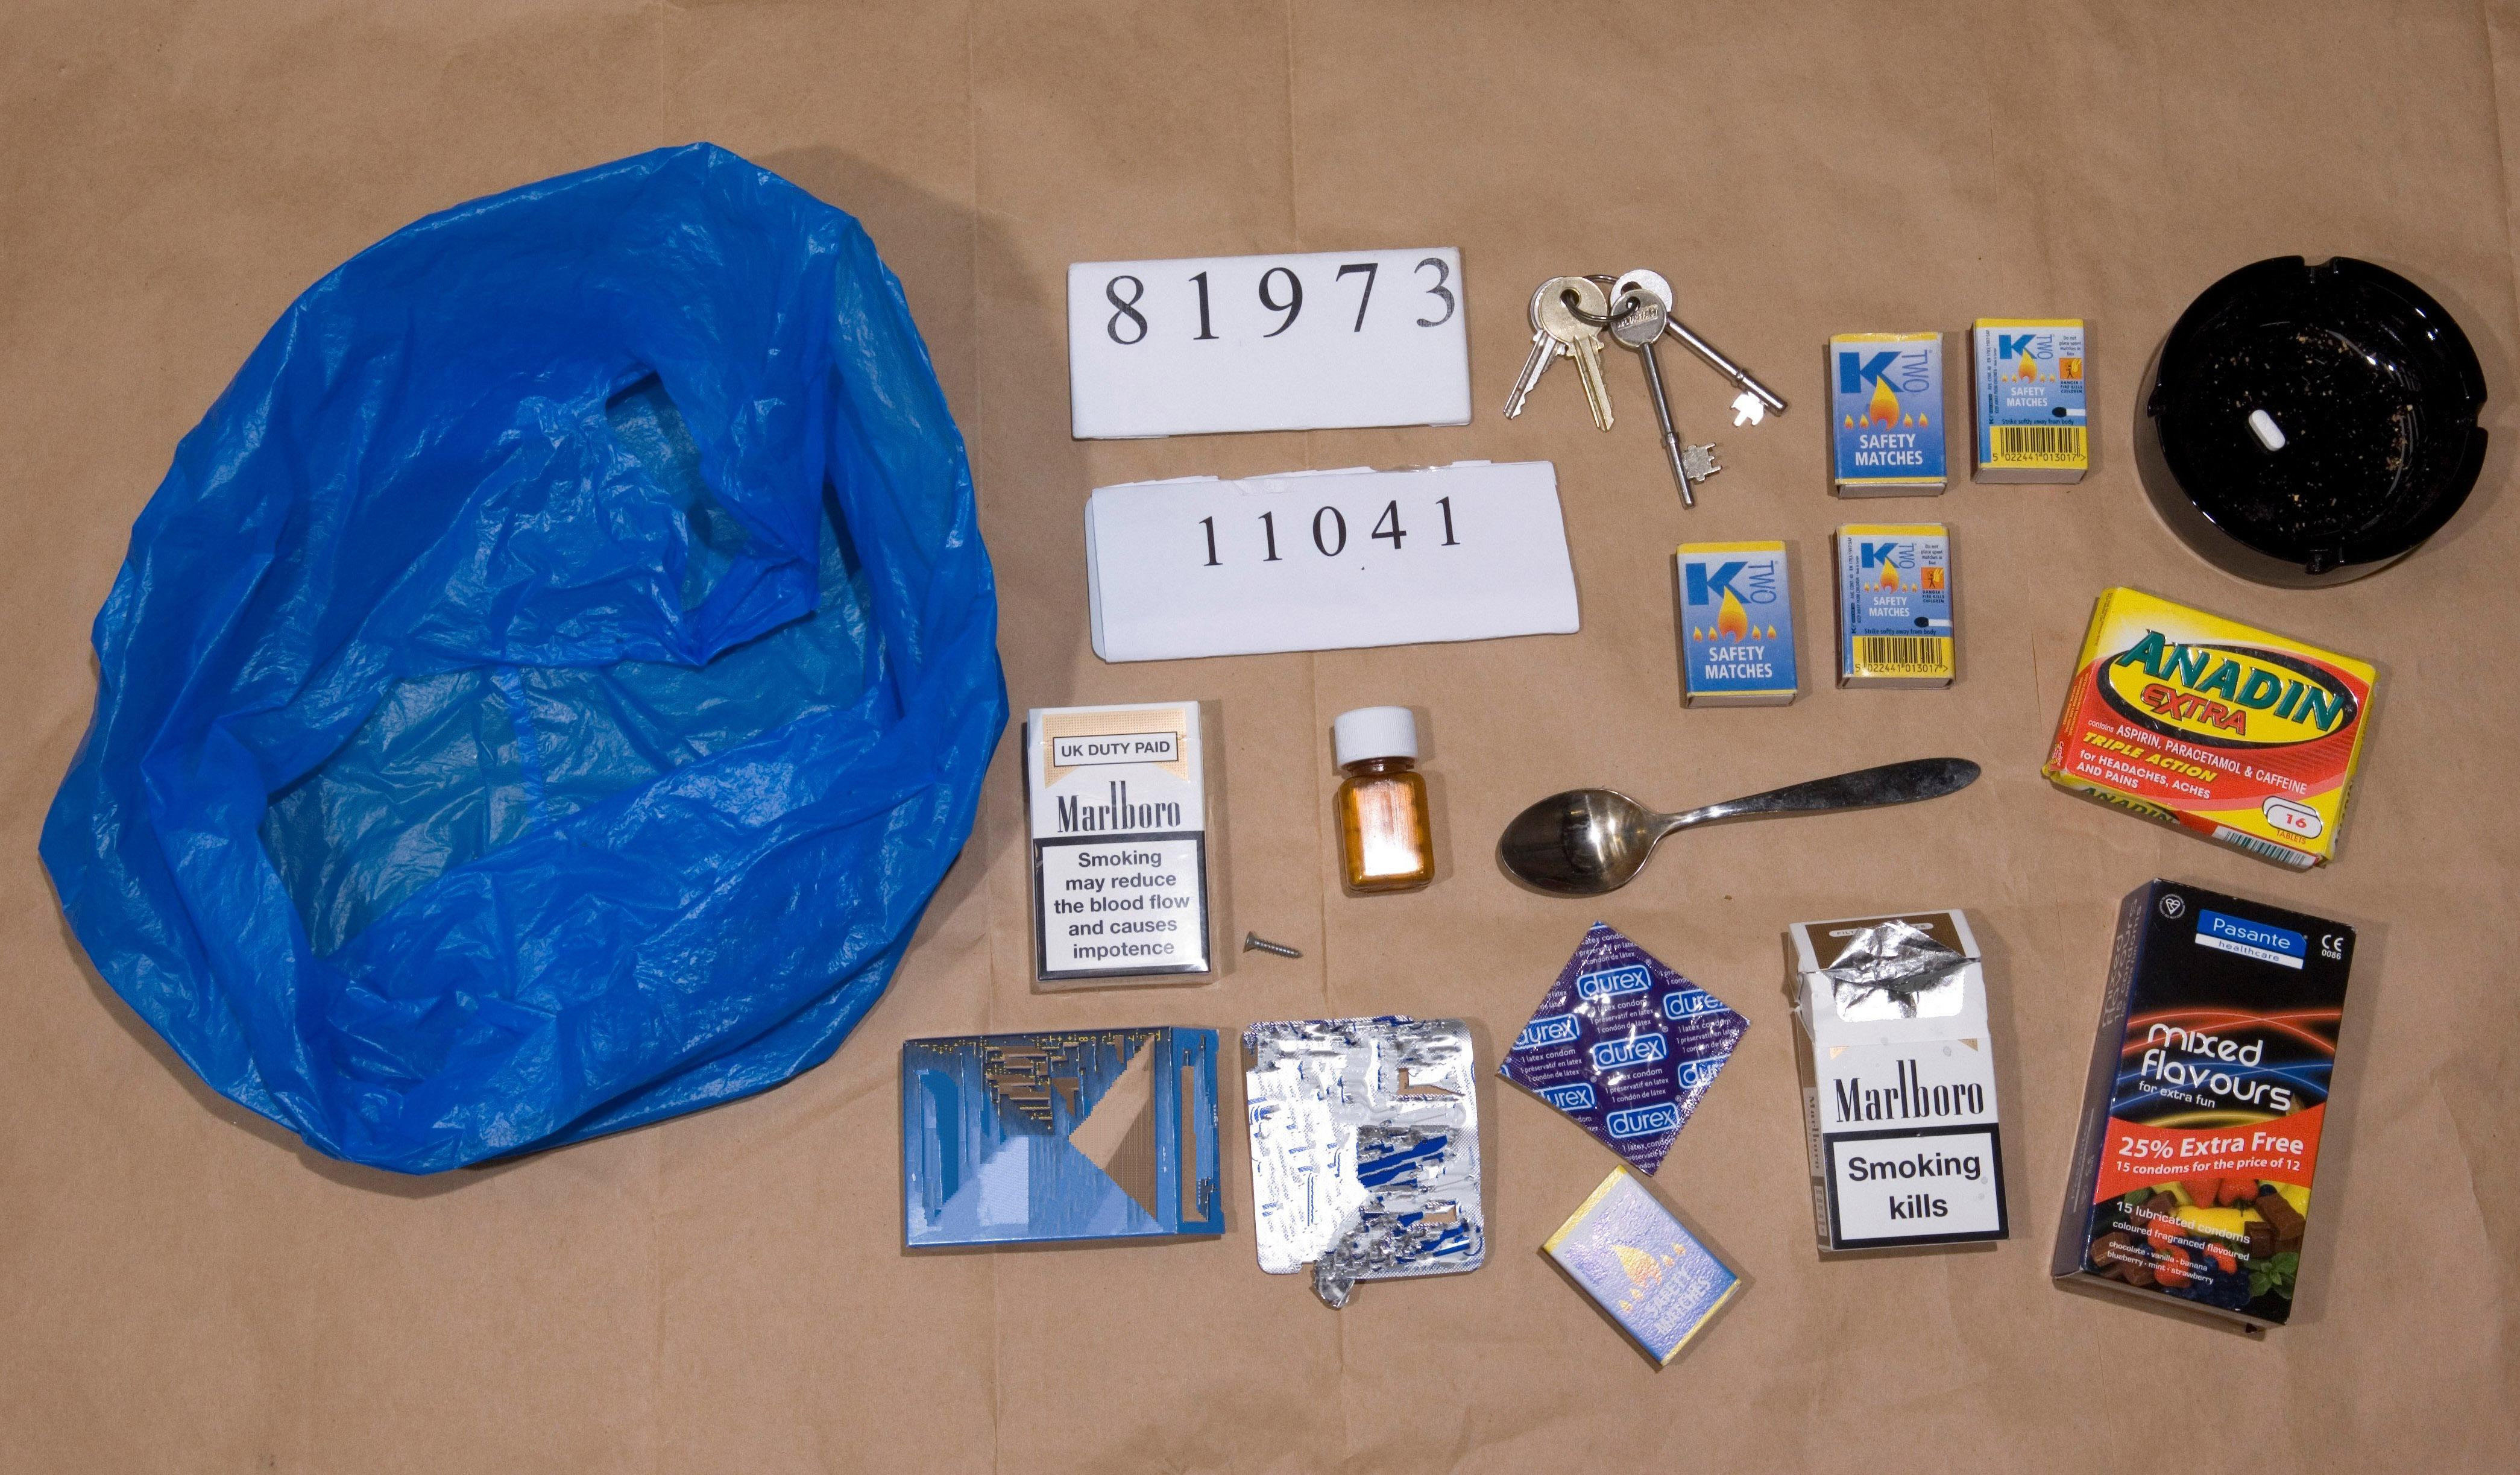 <strong>An undated police handout revealing property seized from Worboys&nbsp;including condoms, cigarettes and medication&nbsp;</strong>